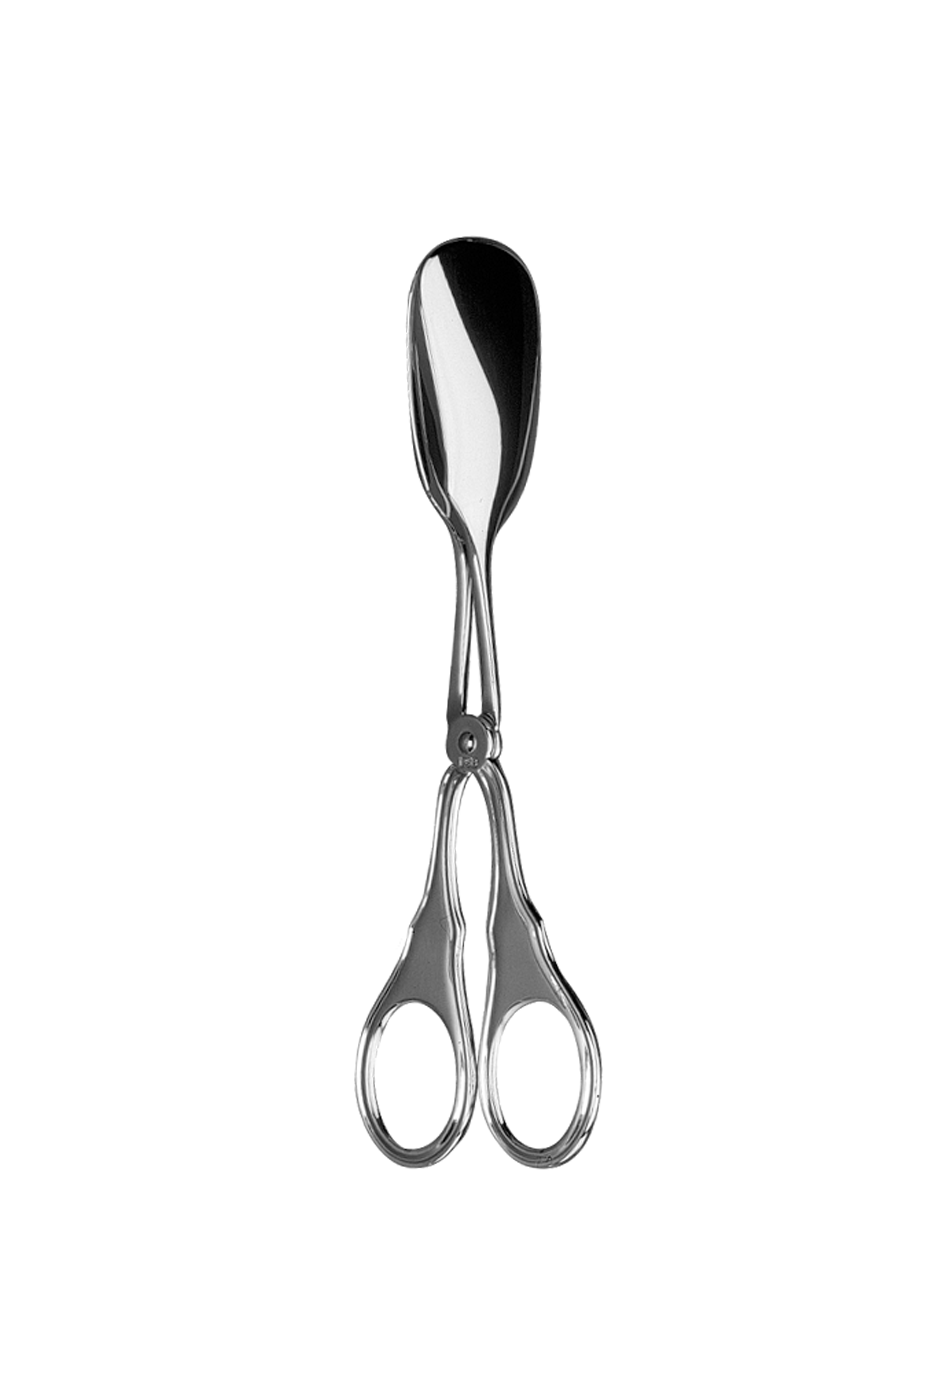 Spaten Pastry tongs (150g massive silverplated)